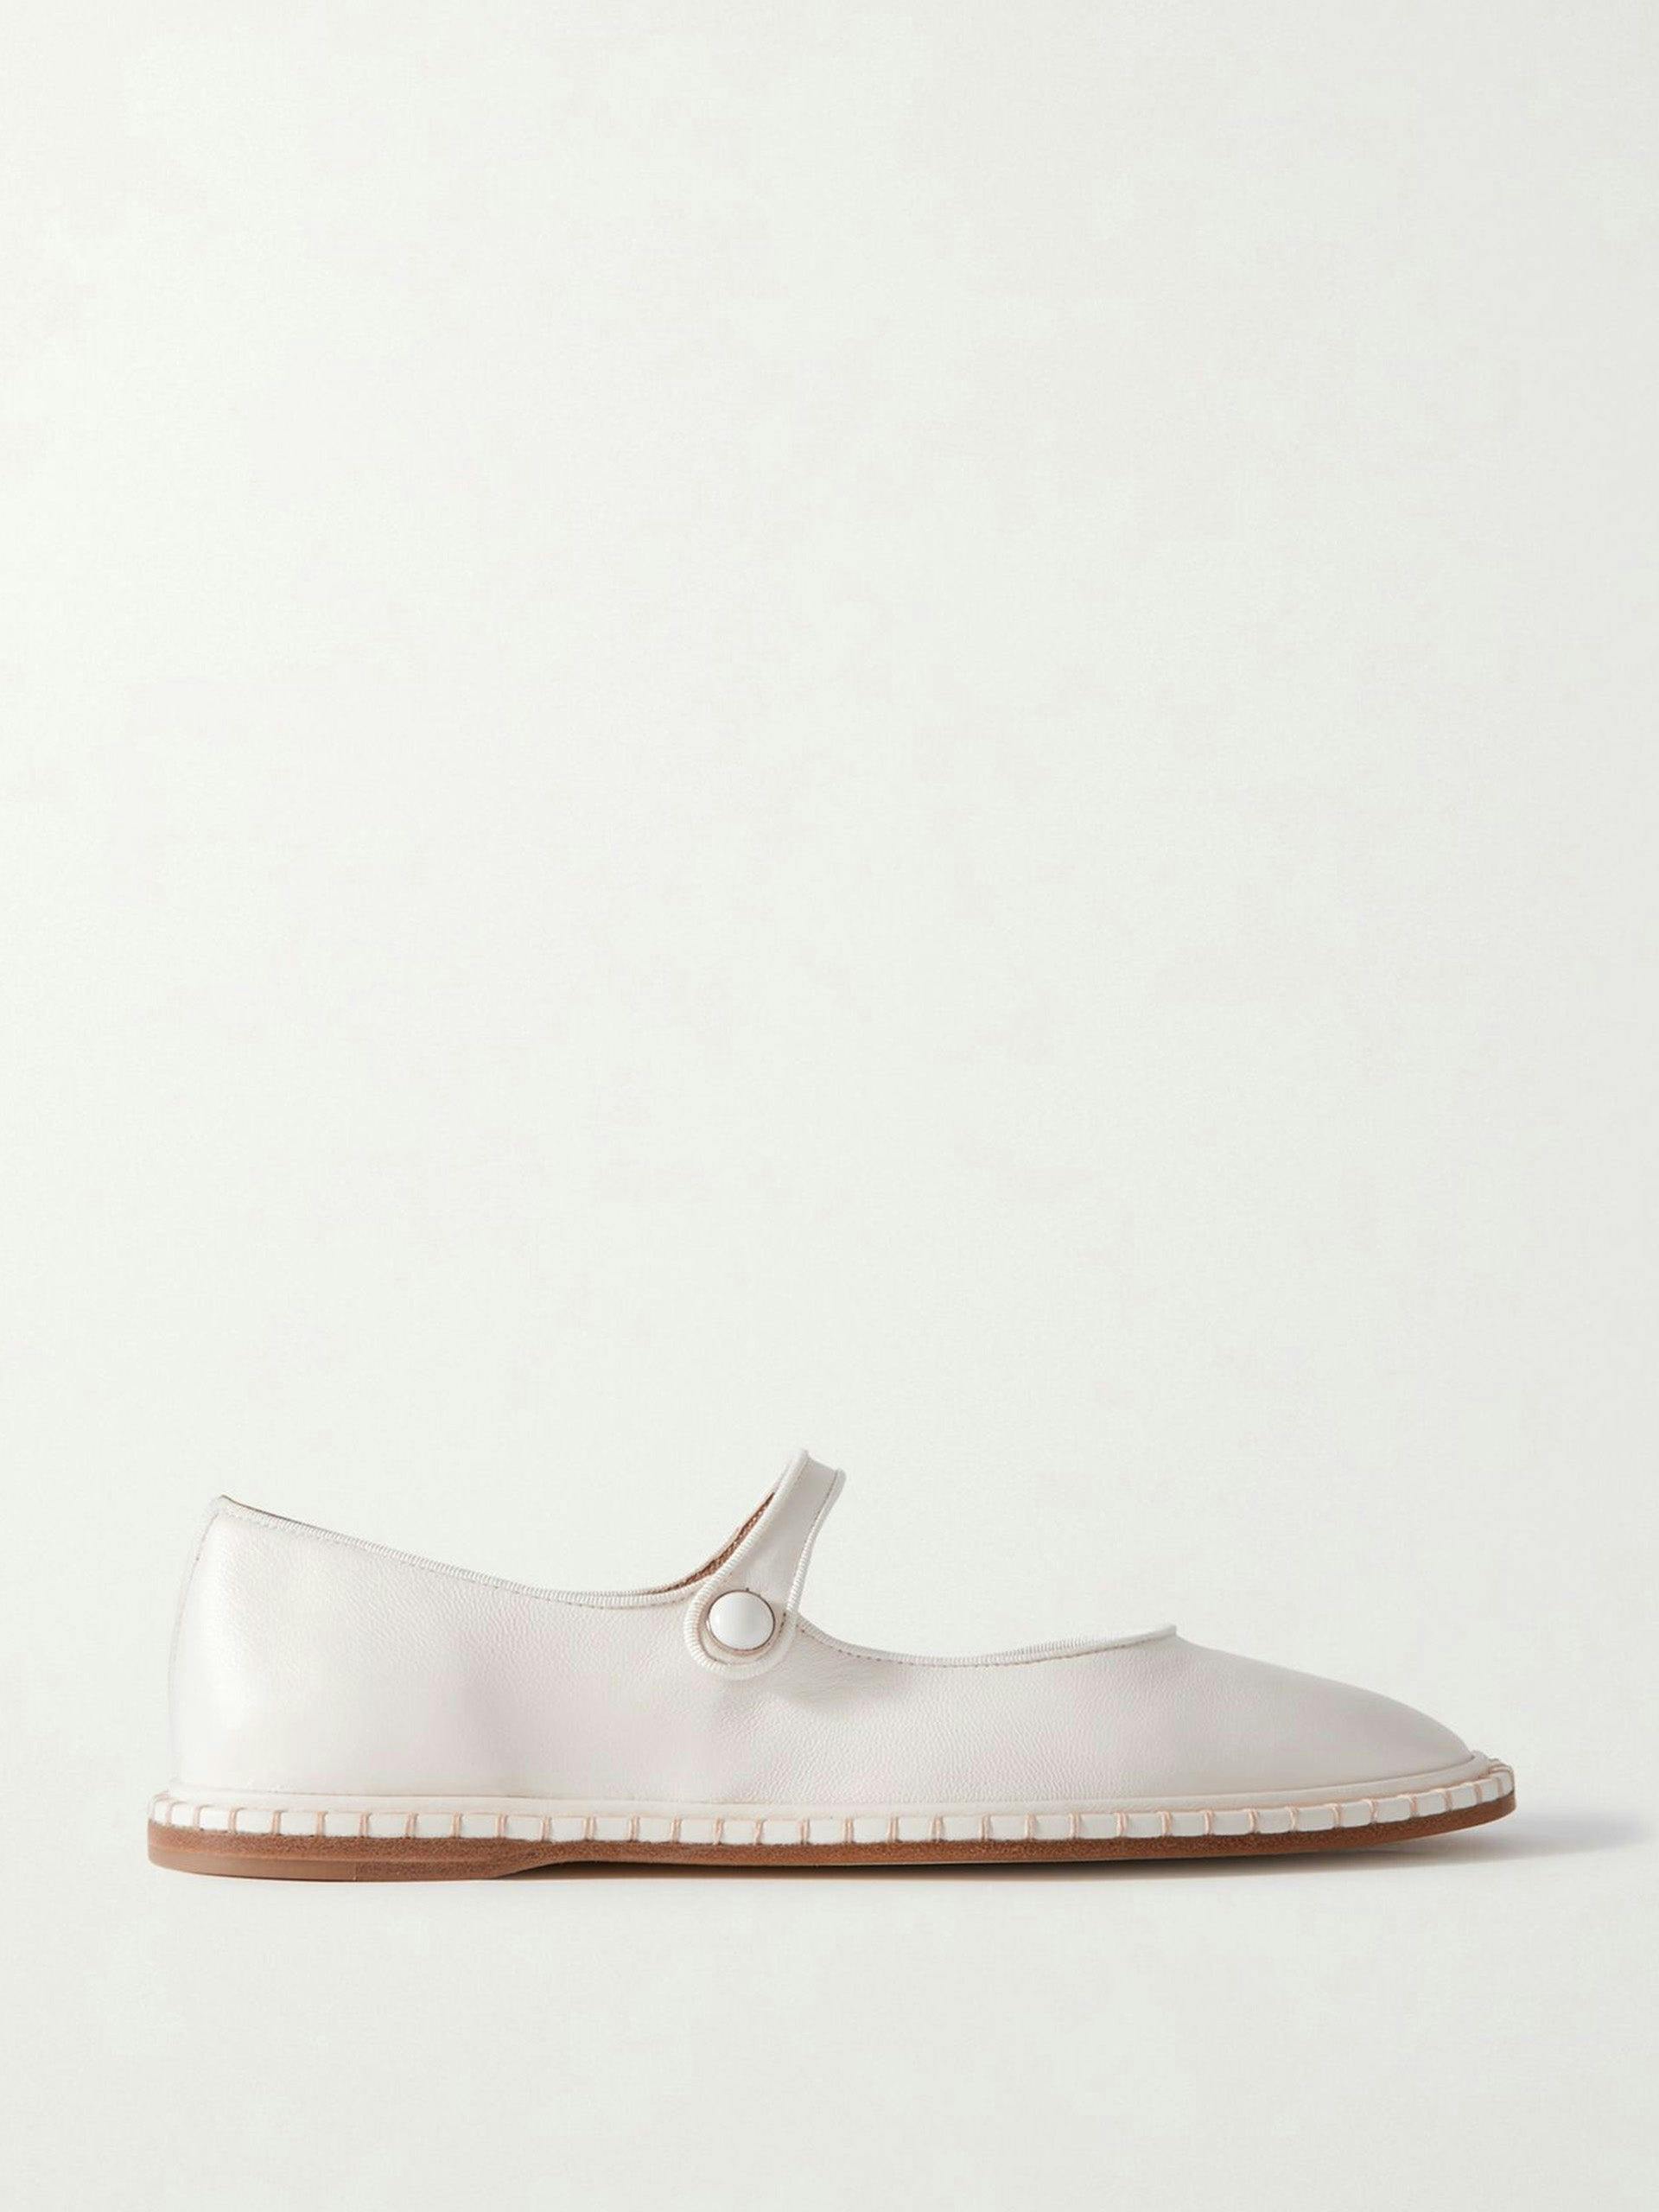 White leather Mary Jane ballet flats